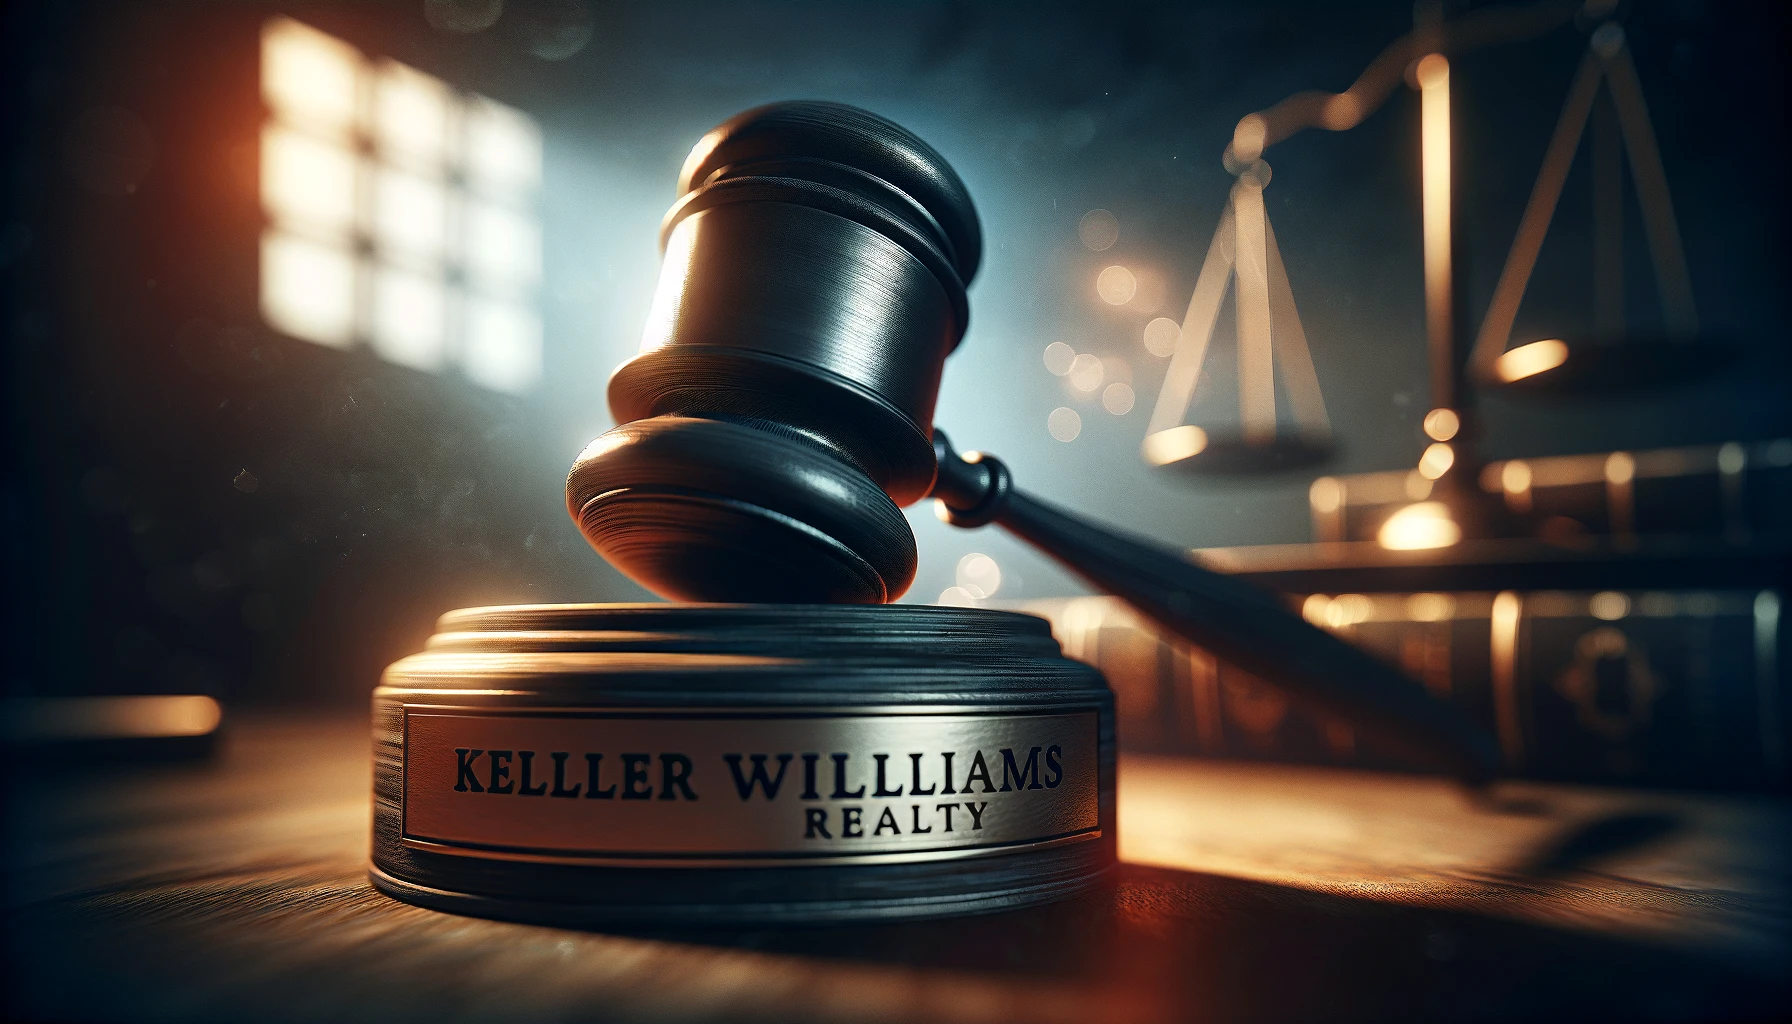 he Gavel of Justice: Legal Scrutiny Over Keller Williams Realty's Program Changes